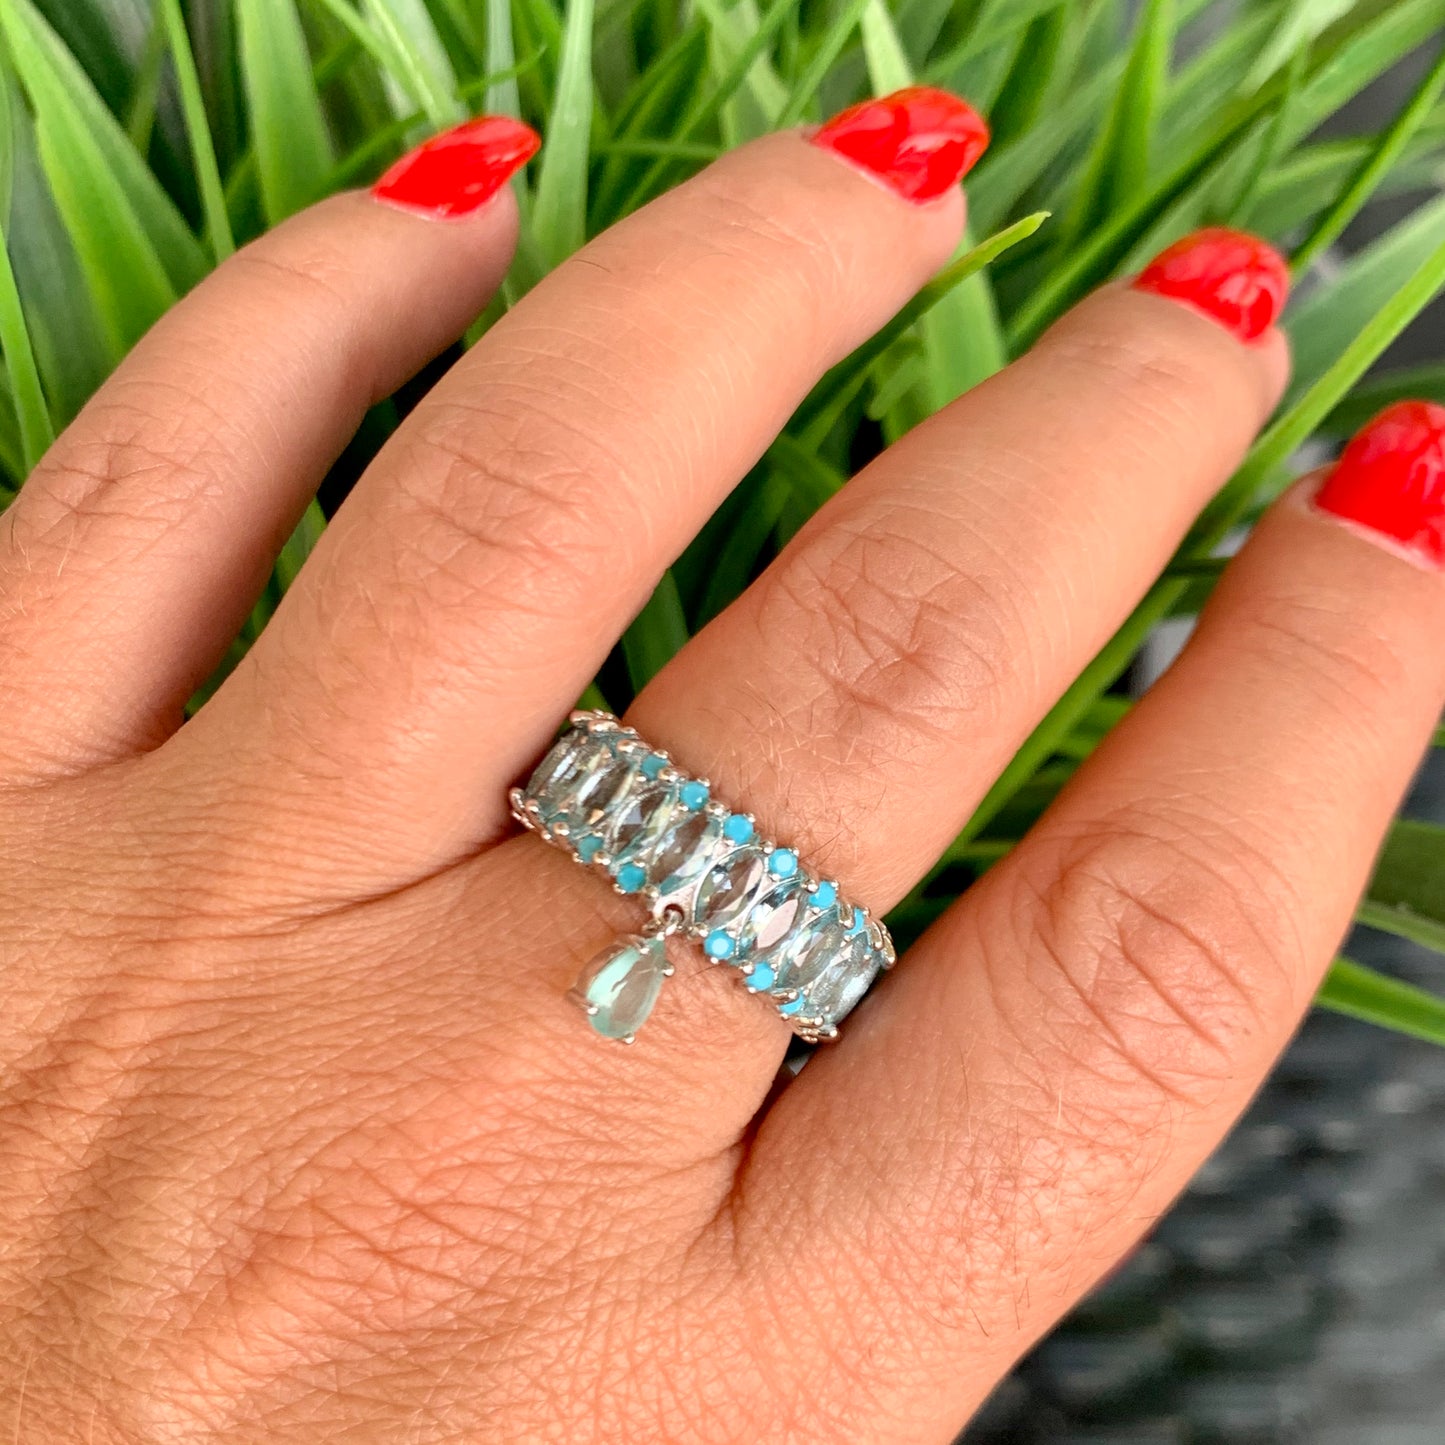 Crystal Blue Ring in Sterling Silver 925